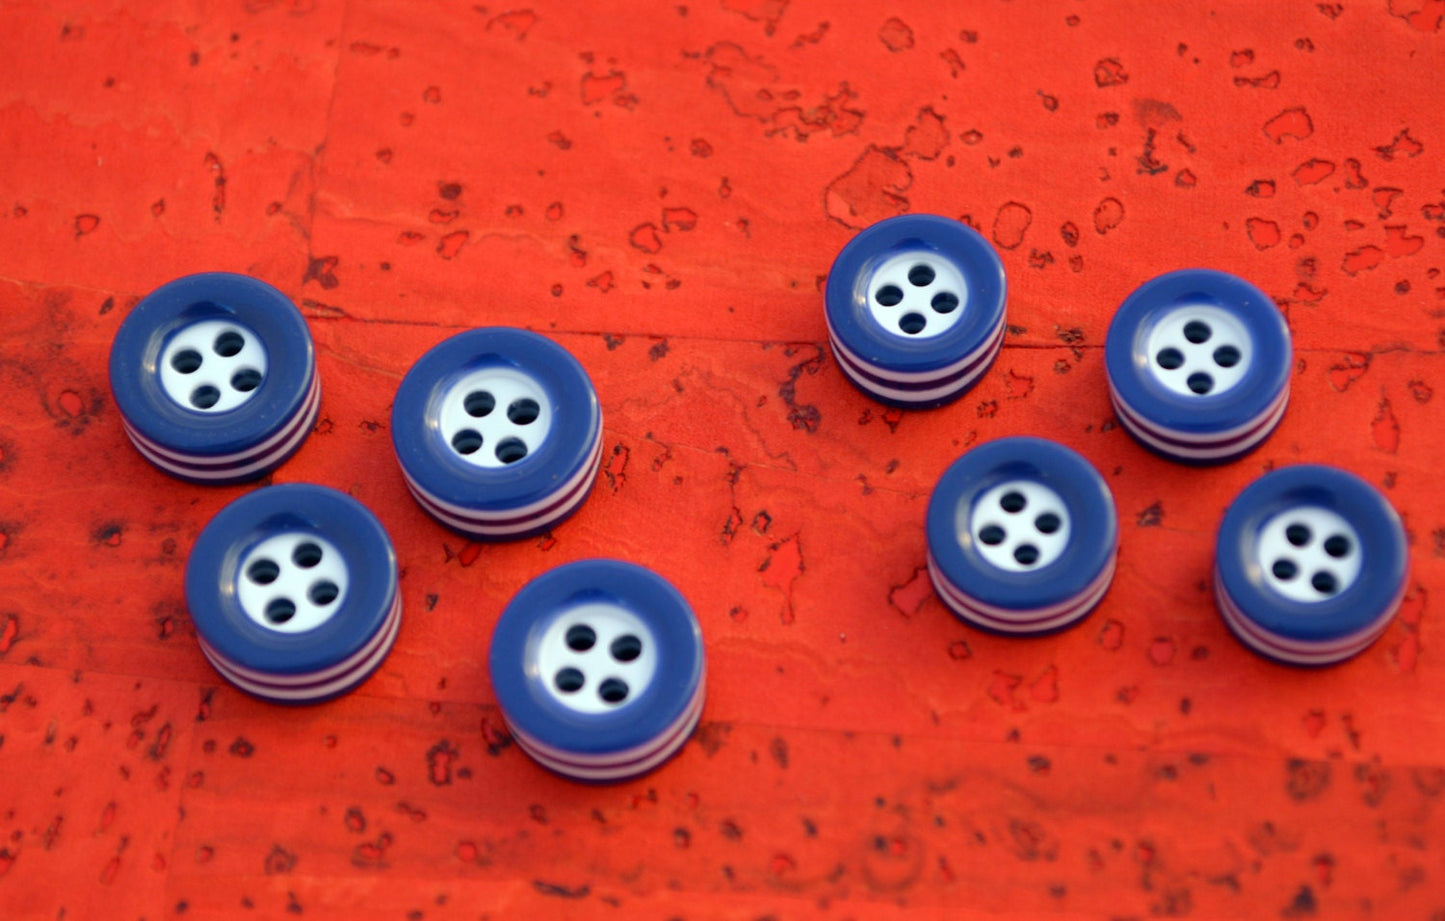 50 white and blue STRIPED BUTTONS - 5mm thick! - choose from sizes 18L 16L - great quality - Made in ITALY